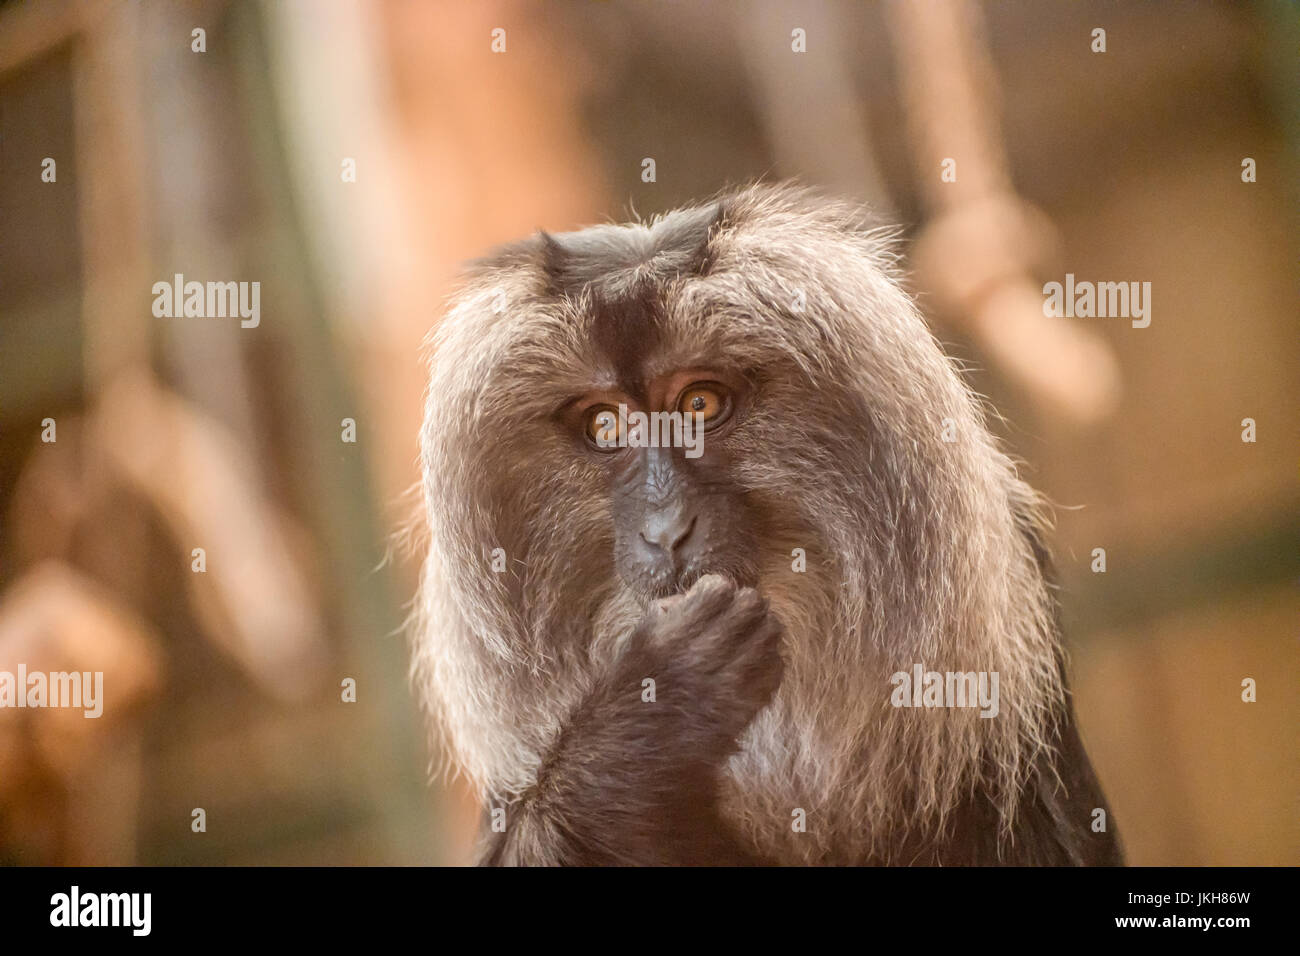 Howler monkey with long grey hair and biting nails as if worried Stock Photo